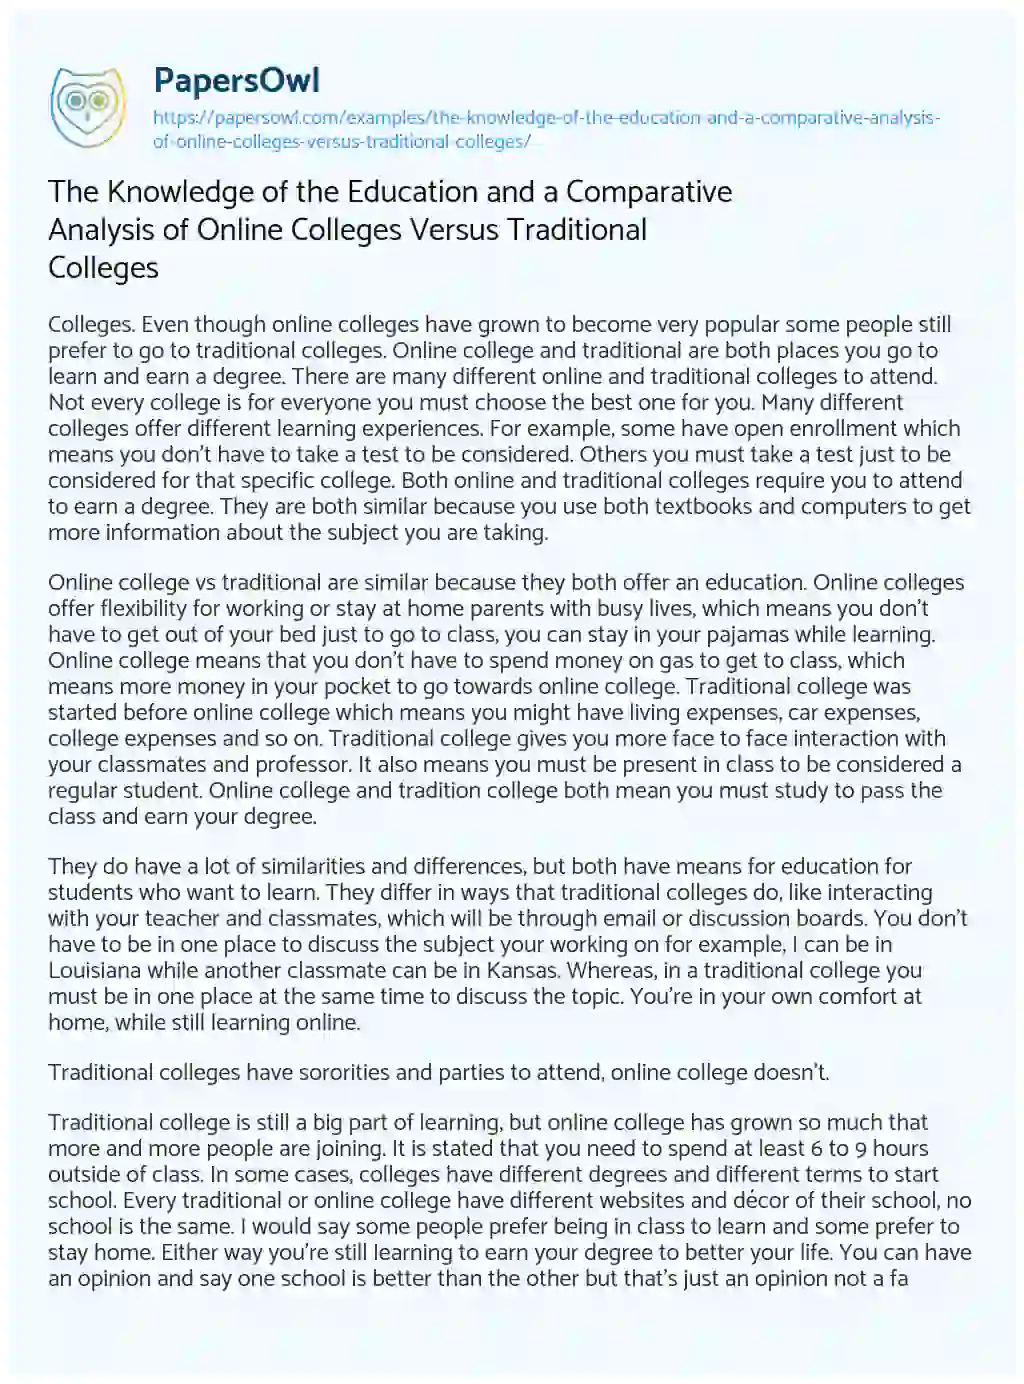 Essay on The Knowledge of the Education and a Comparative Analysis of Online Colleges Versus Traditional Colleges